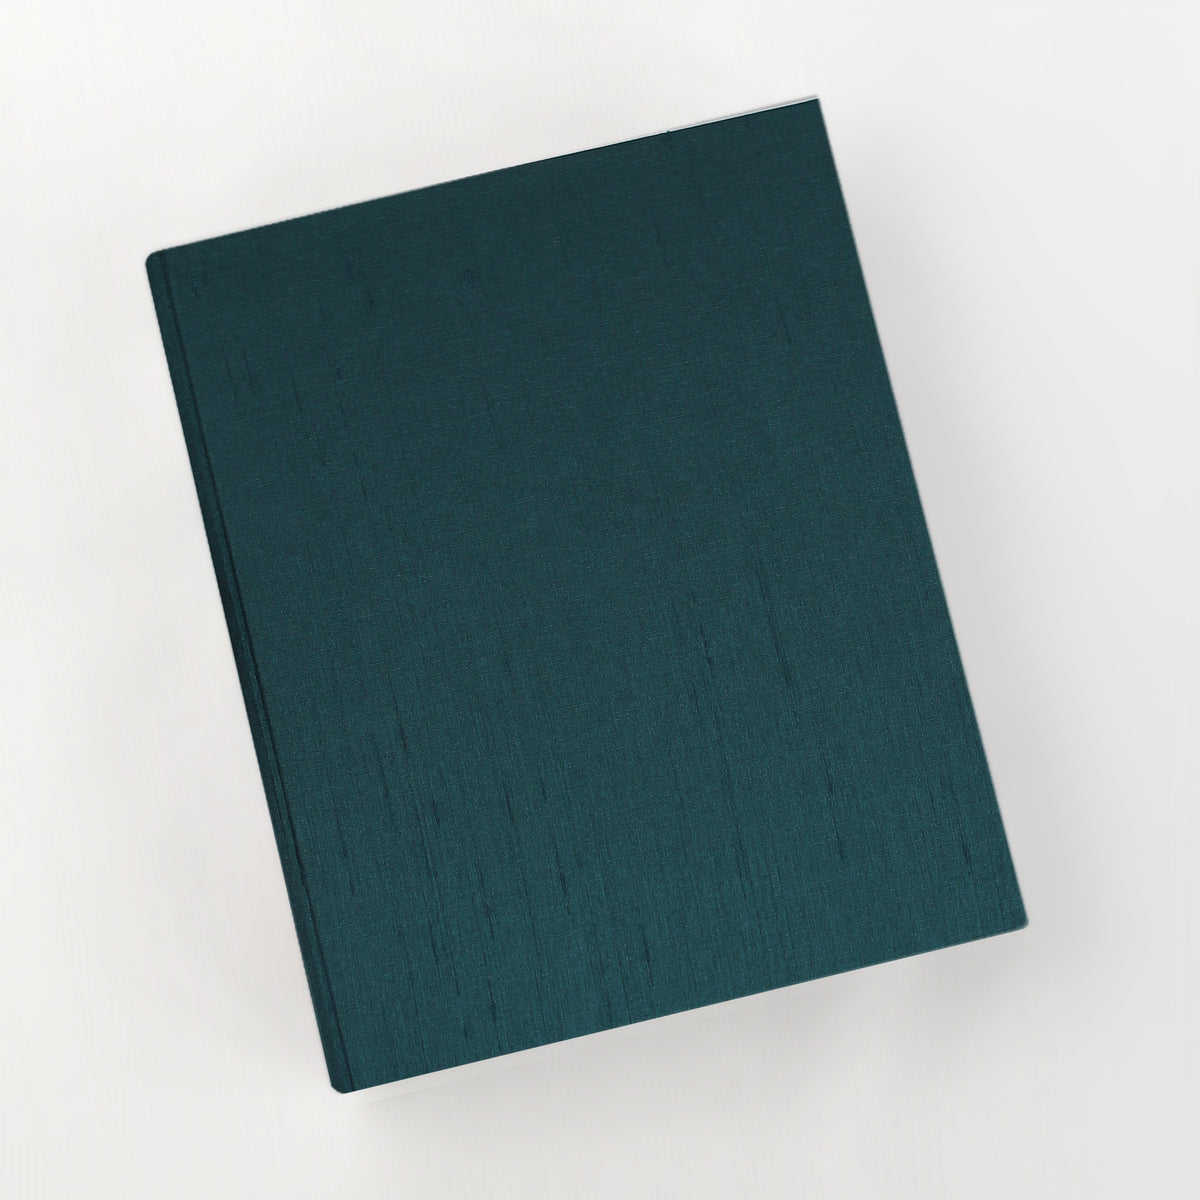 Large 8x10 Blank Page Journal | Cover: Teal Blue Silk | Available Personalized